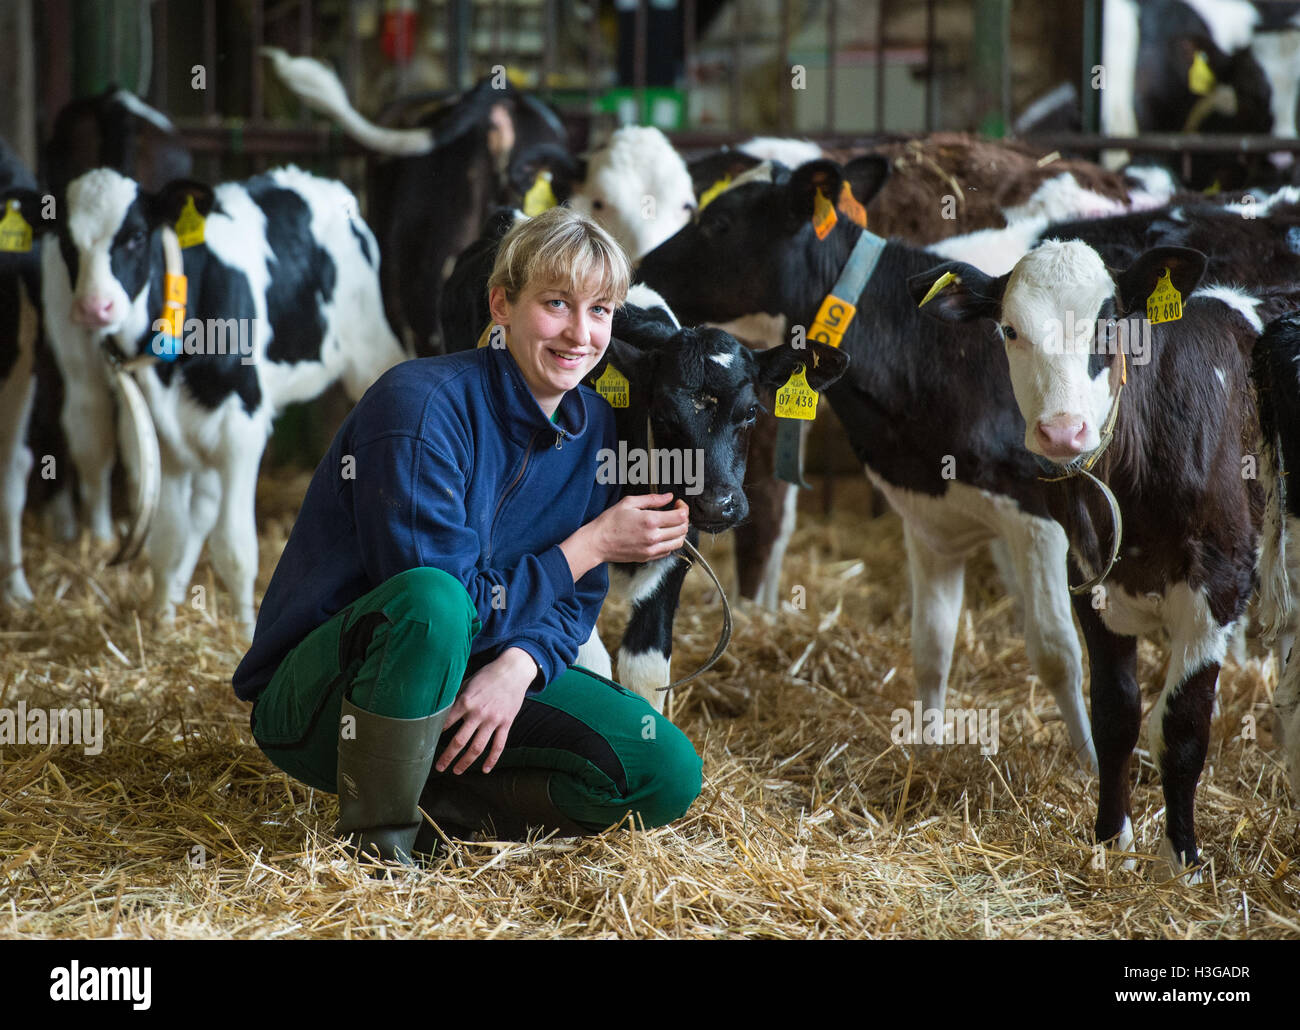 The animal farmer Rebecca Harnack sits among calfs of the productive community Dannenberg in Dannenberg, germany, 5 October 2016. Rebecca Harnack won the 32. professional competition in Rendsburg, Germany, on the 4 June 2016 in the category of animal farmer. She had already secured the title of best animal farmer on a state level. In the nationwide competitions both theoretical and general knowledge as well as practical skills are assessed. Photo: Patrick Pleul Stock Photo